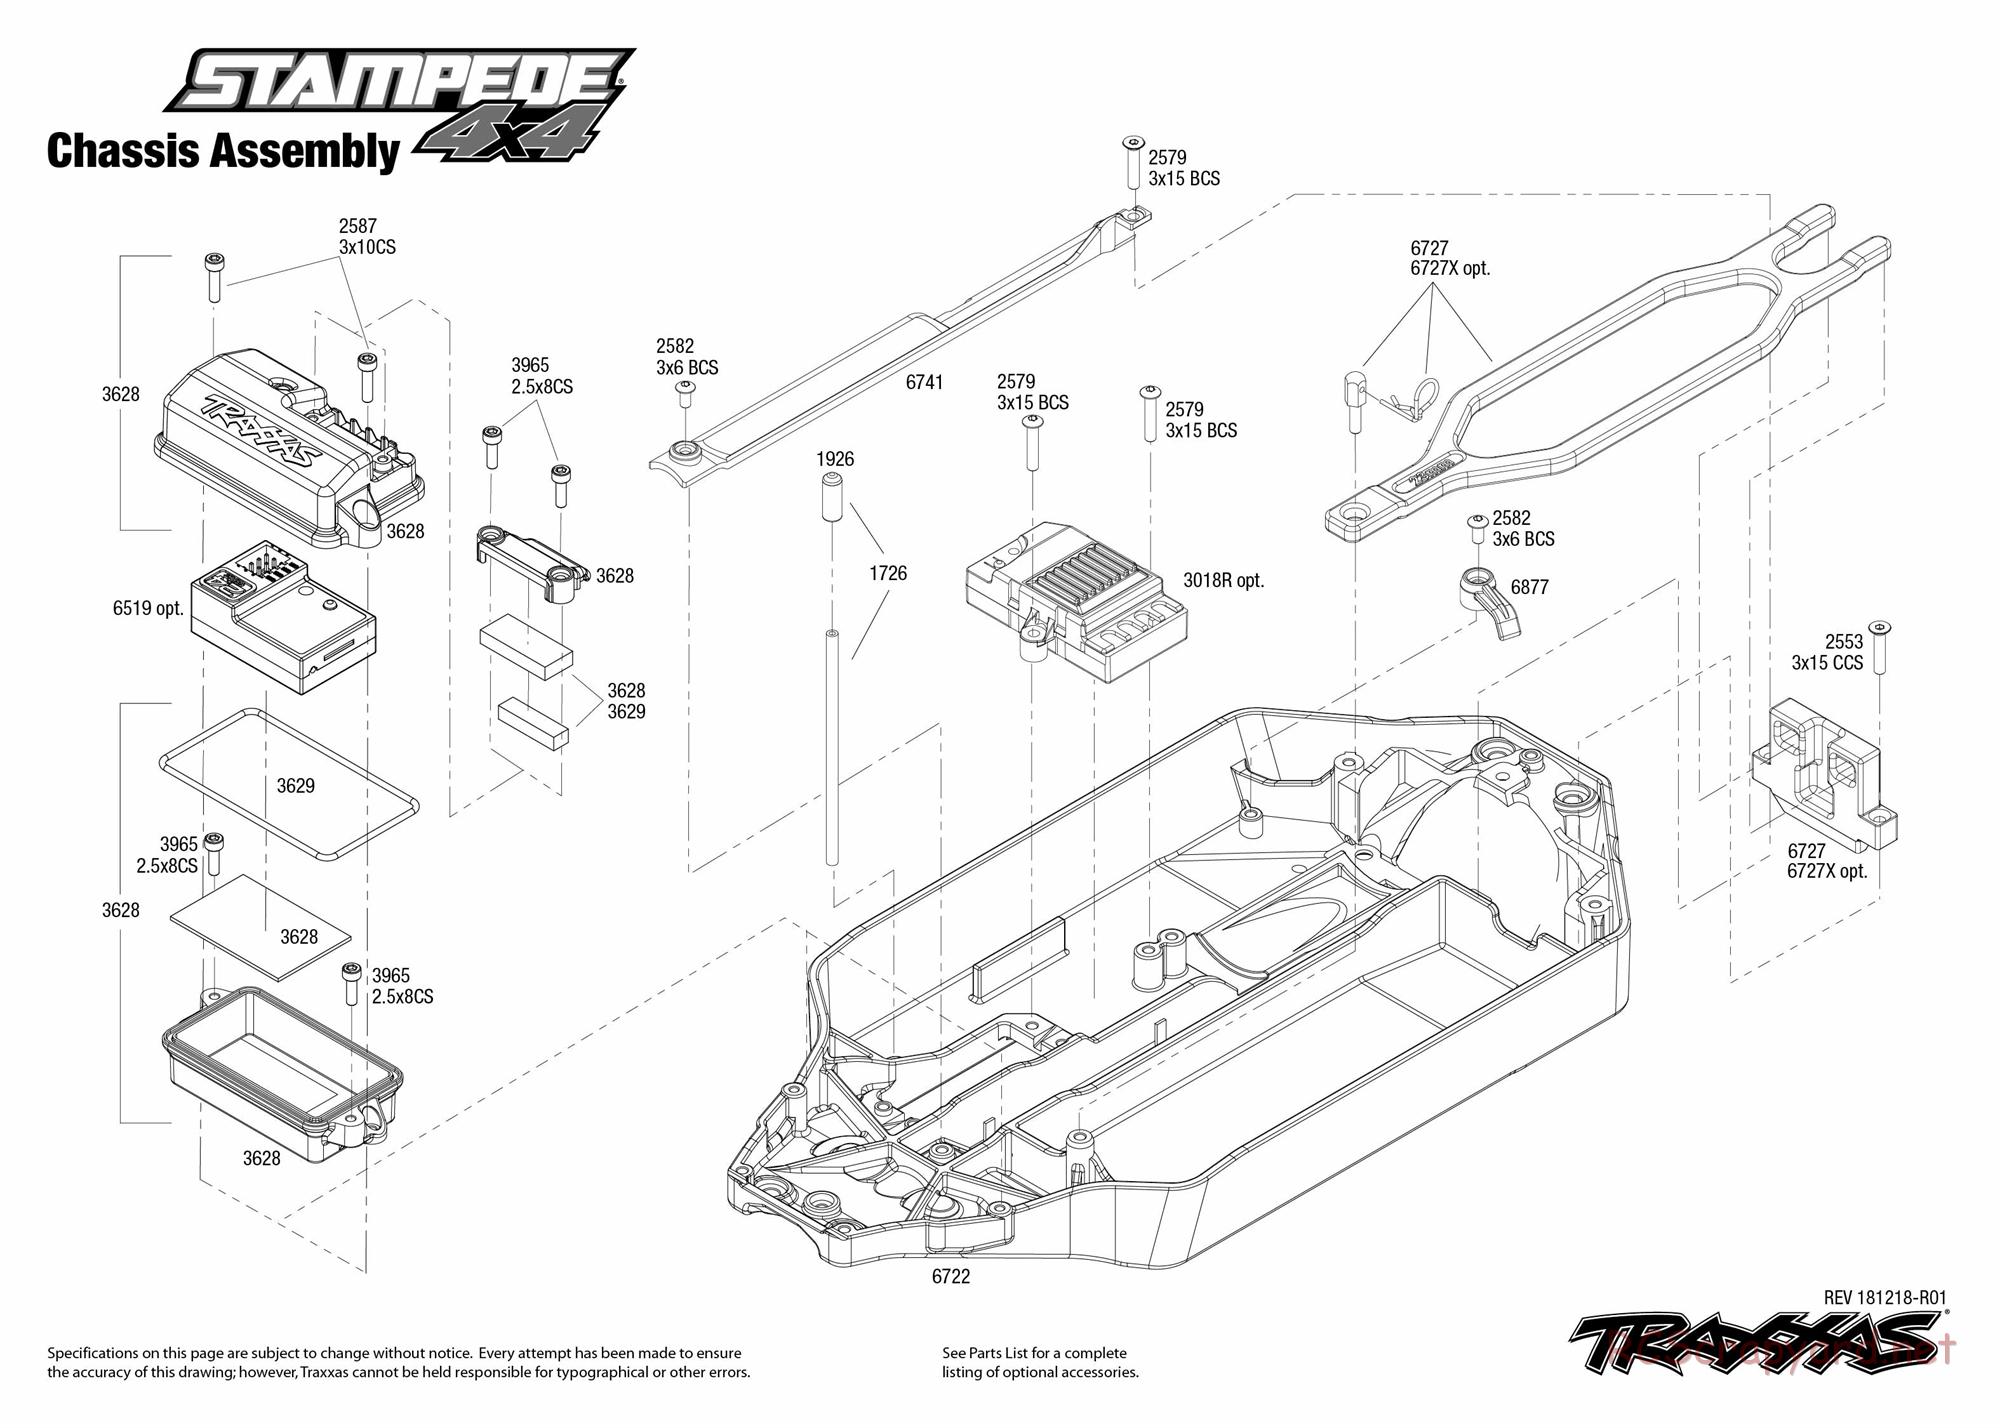 Traxxas - Stampede 4x4 (2019) - Exploded Views - Page 1